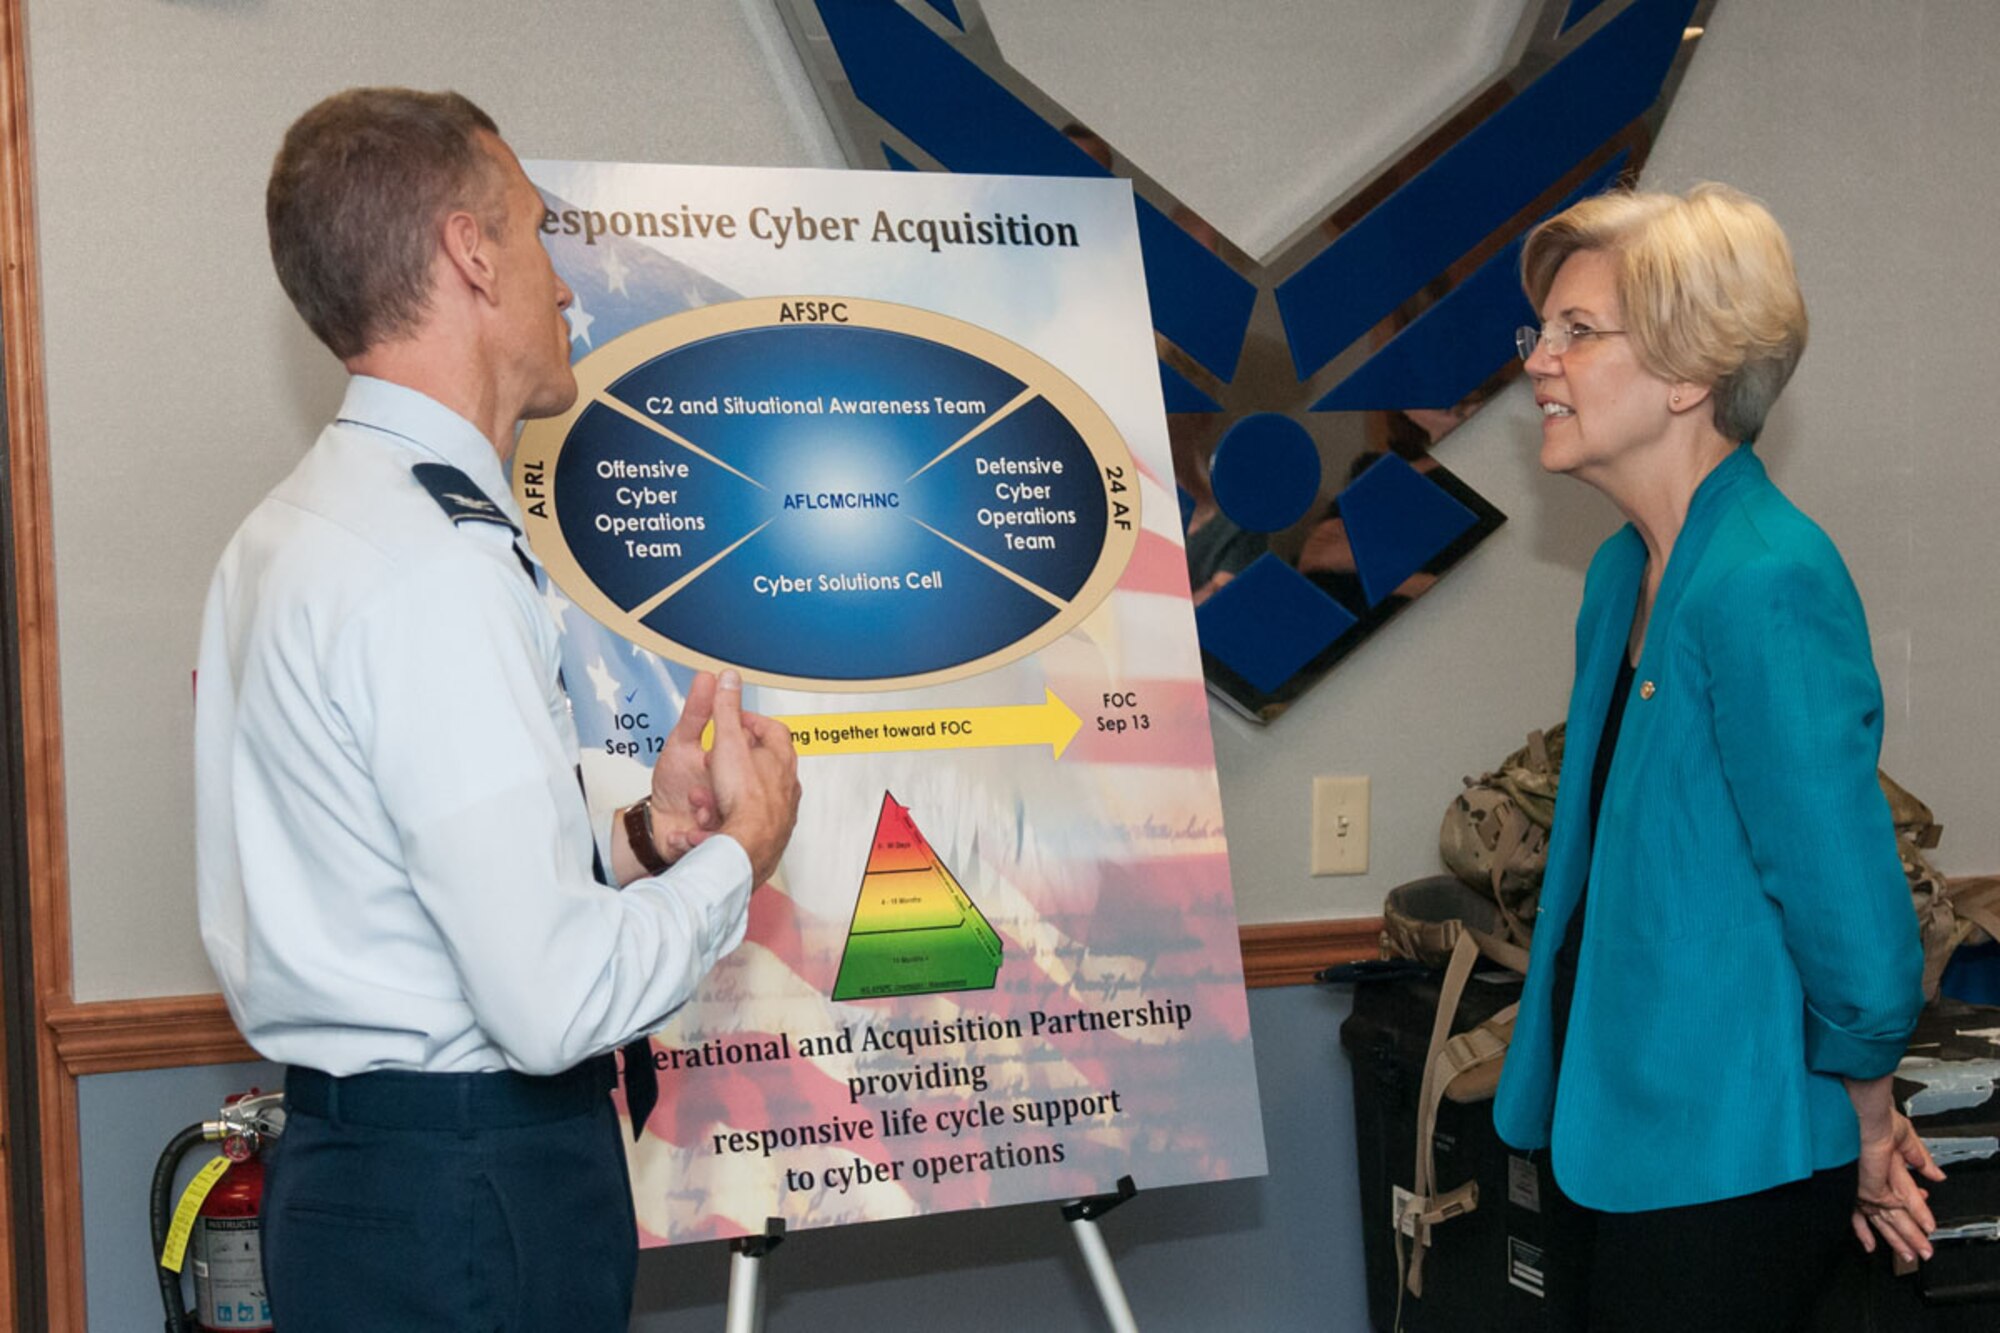 HANSCOM AIR FORCE BASE, Mass. -- U.S. Senator Elizabeth Warren discusses responsive cyber acquisition with Col. Bill Polakowski, Cyber Integration Division deputy, during her first full visit here Aug. 20. The senator learned about the important work being done by the division, along with receiving an Air Force Life Cycle Management Center mission overview and technology demonstrations. (U.S. Air Force photo by Rick Berry)